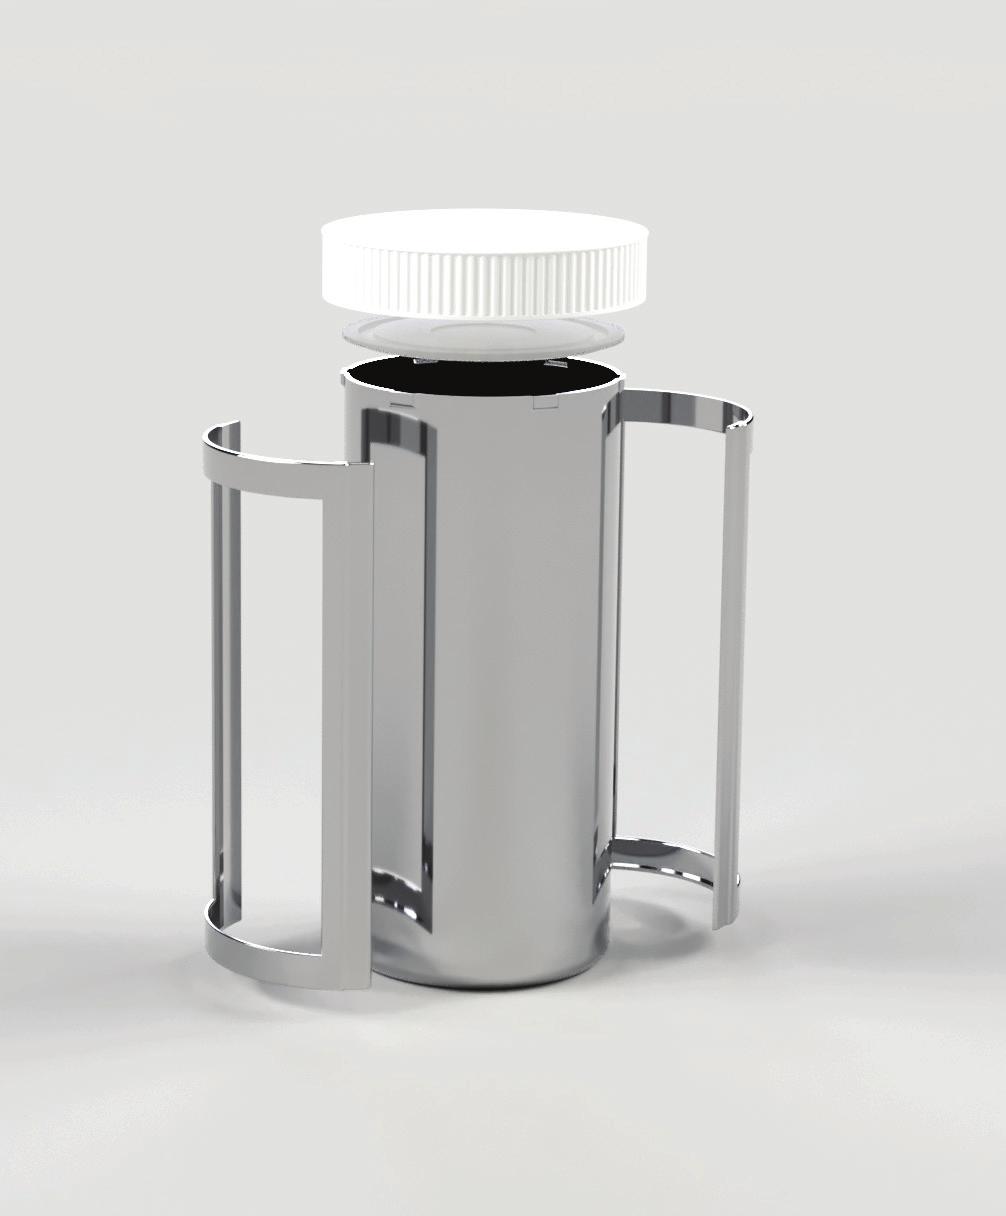 5 Designing with Autodesk s Fusion 360 Autodesk s Fusion 360 was a crucial tool in the development of Rex, a reusable prescription medication bottle.